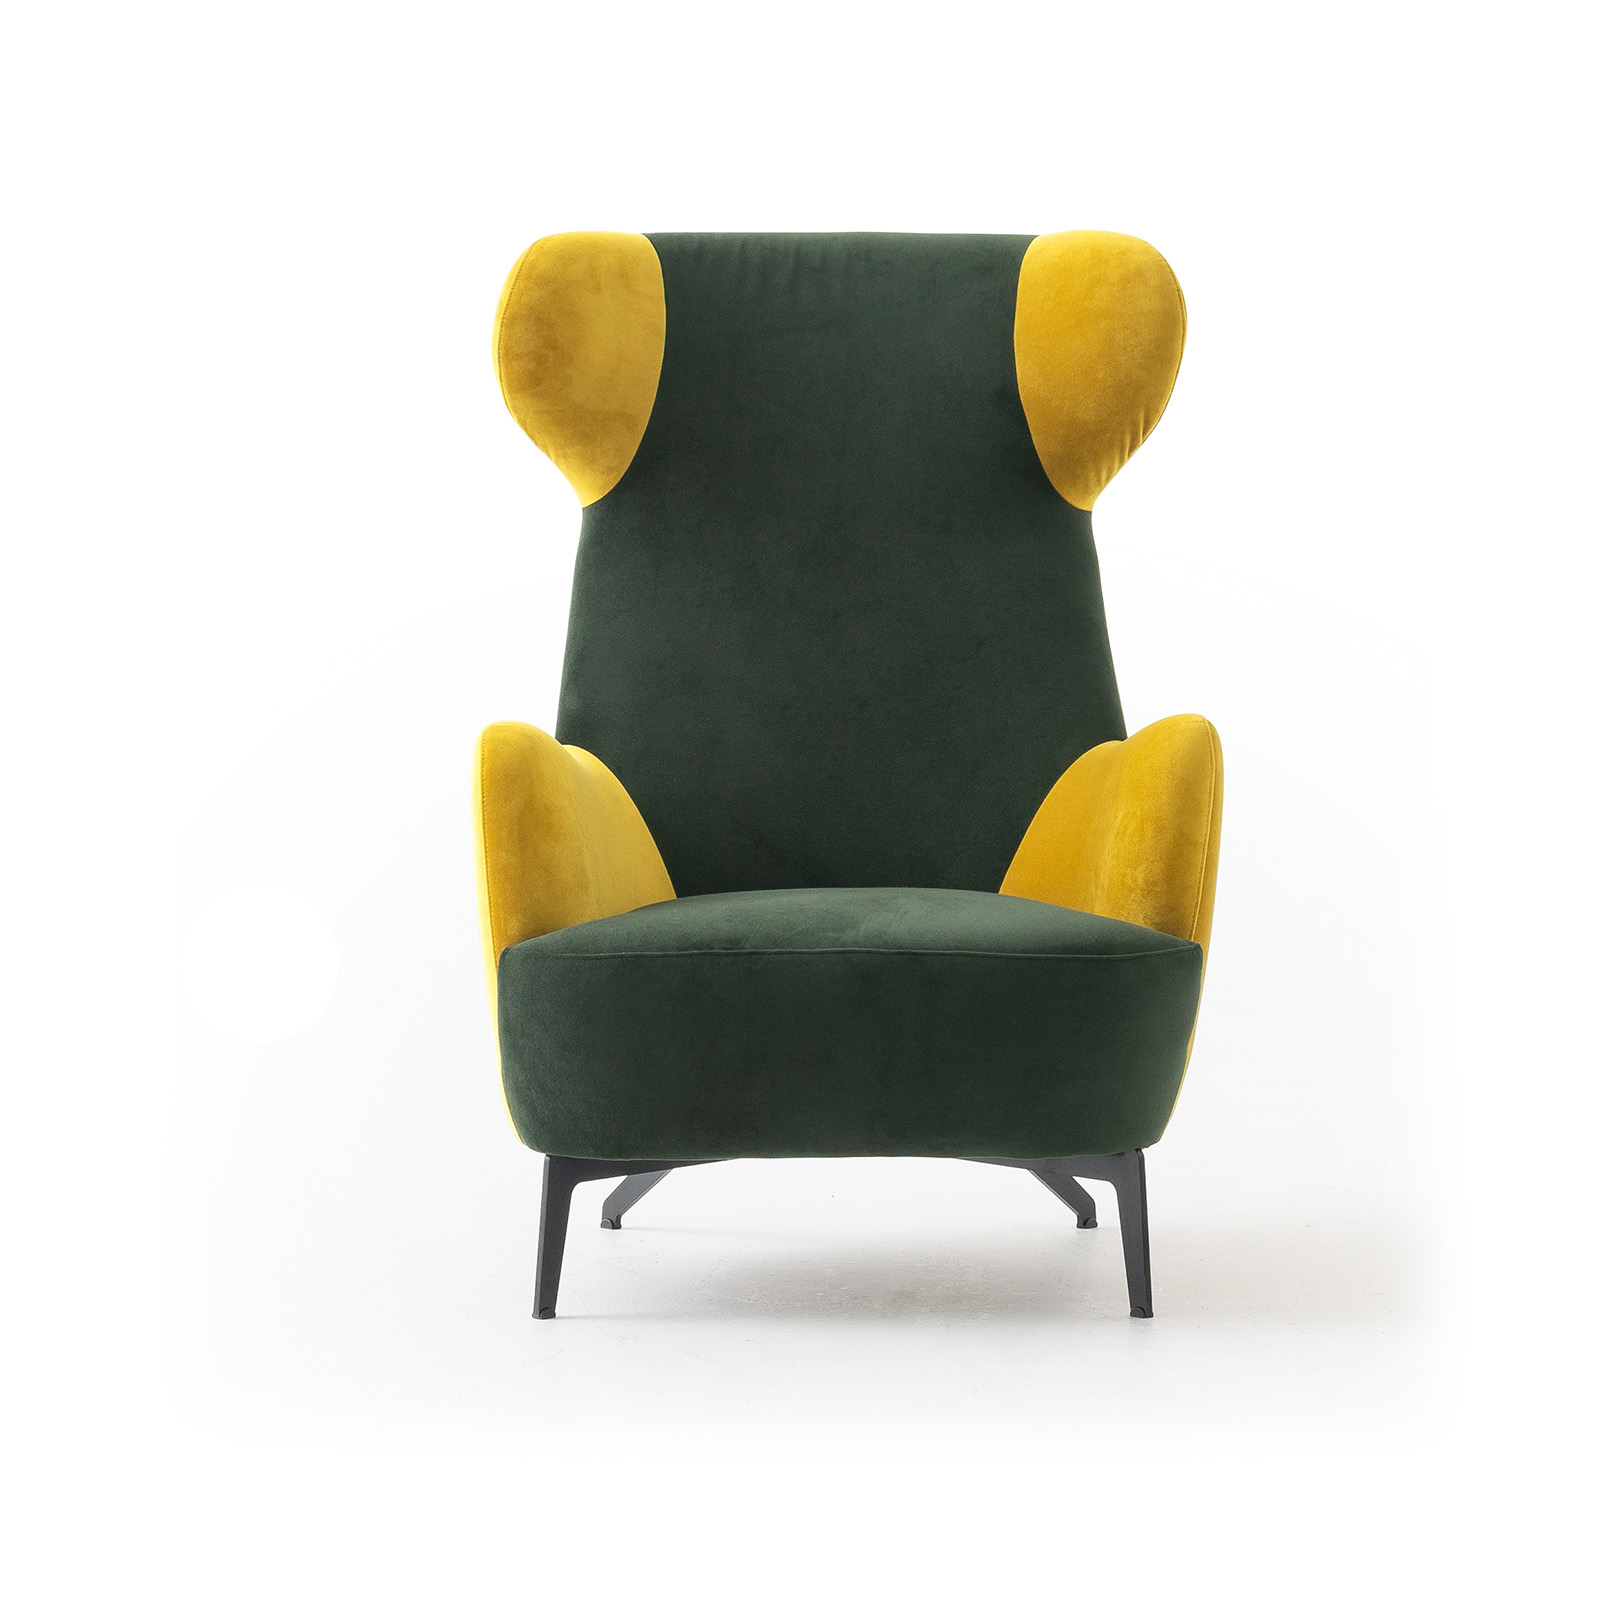 Olive Colorium Armchair - Dark green fabric with yellow arms and back wings